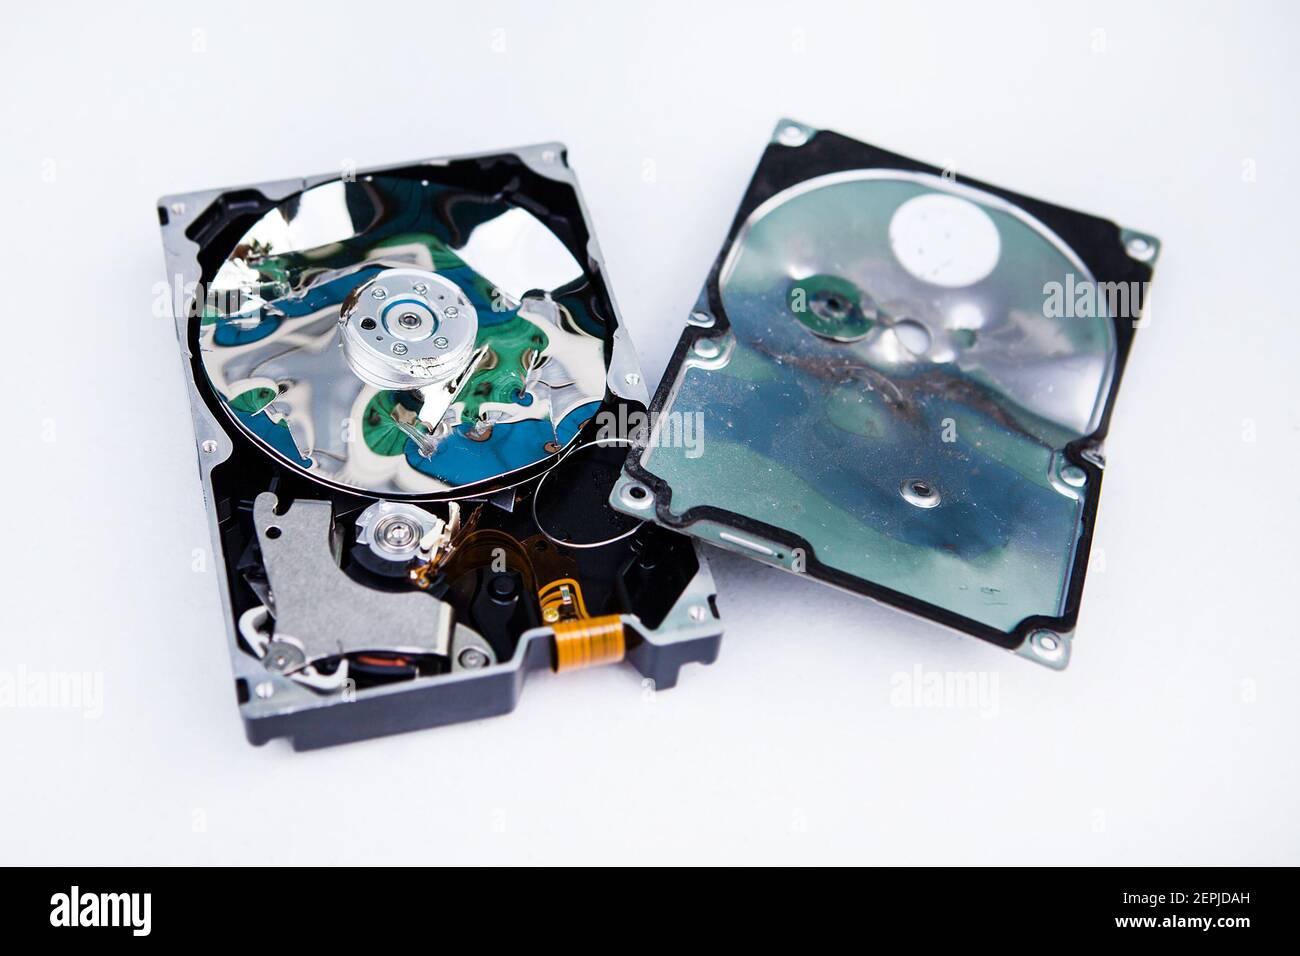 Crushed Hard Disk Drive on the White Table closeup Stock Photo